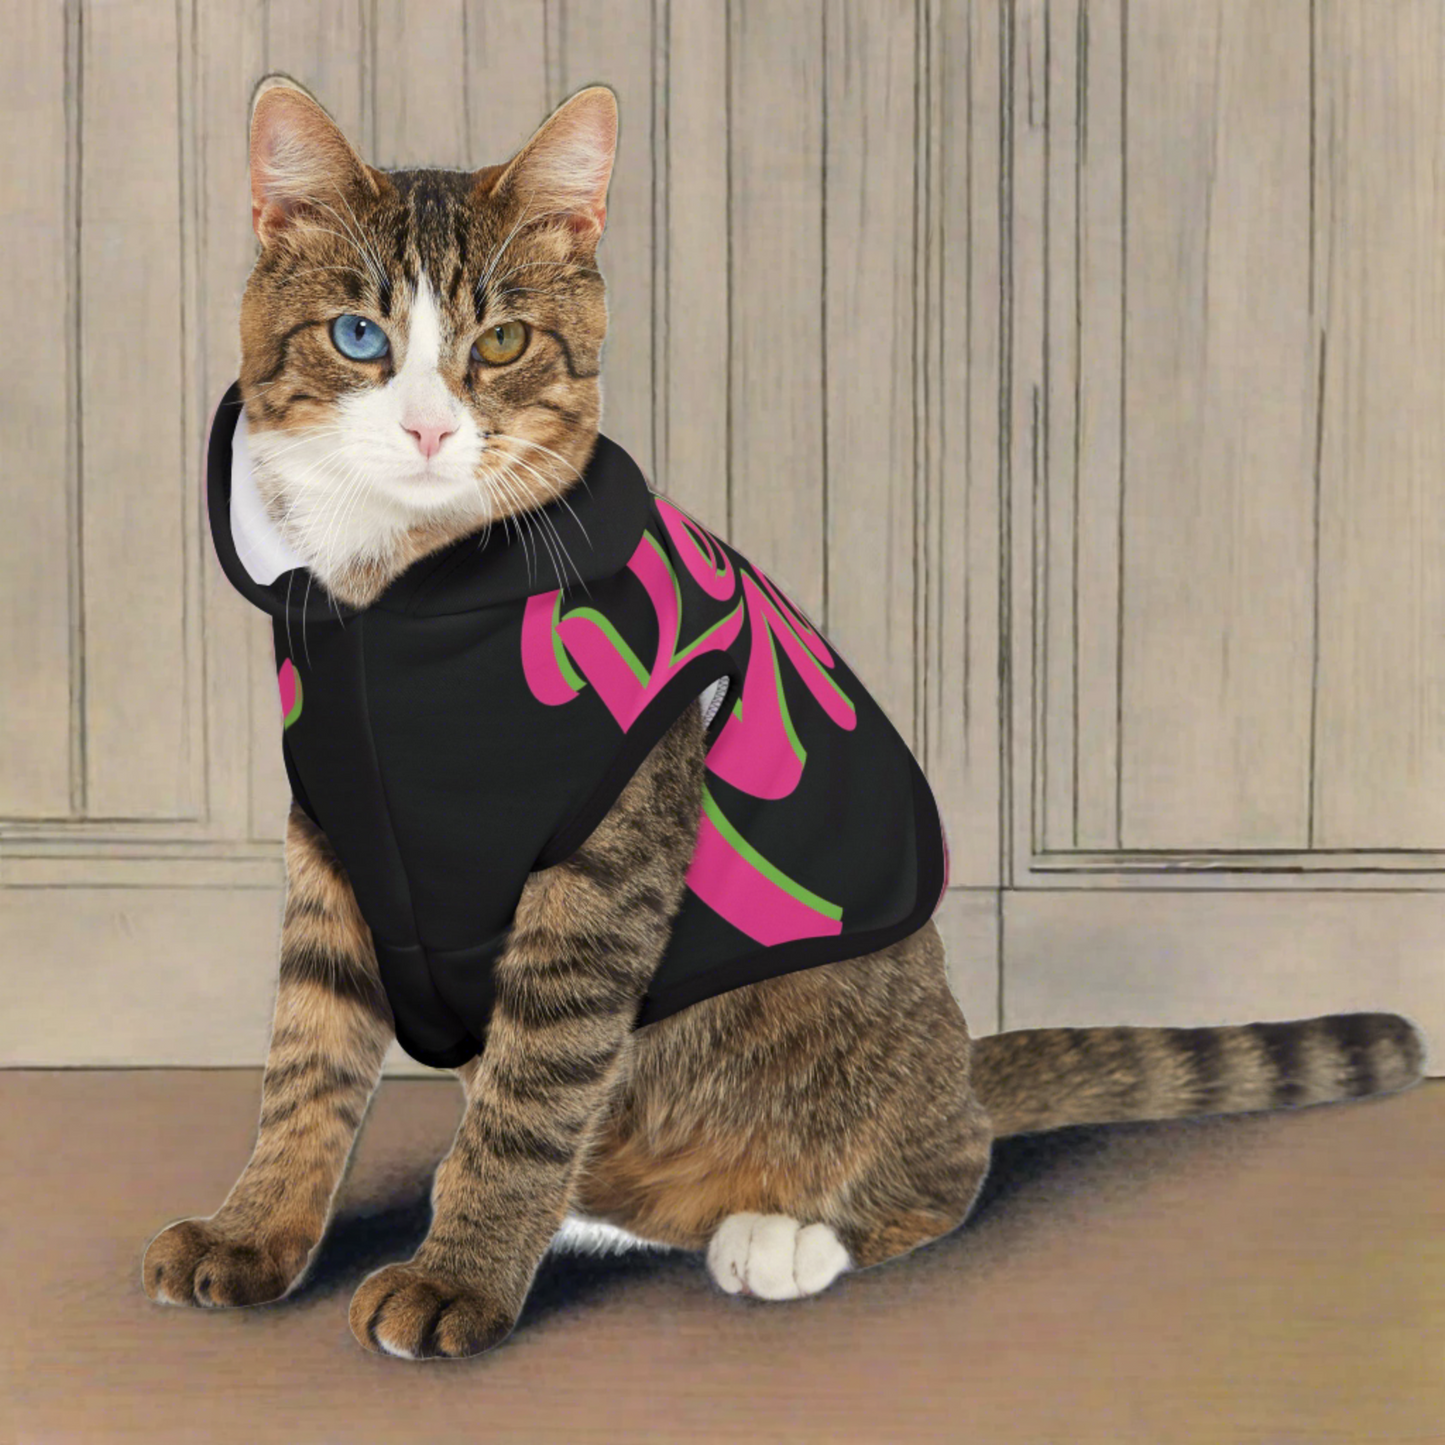 Pet Hoodie | for Dogs and Cats | Black & Fuchsia RevelMates Design